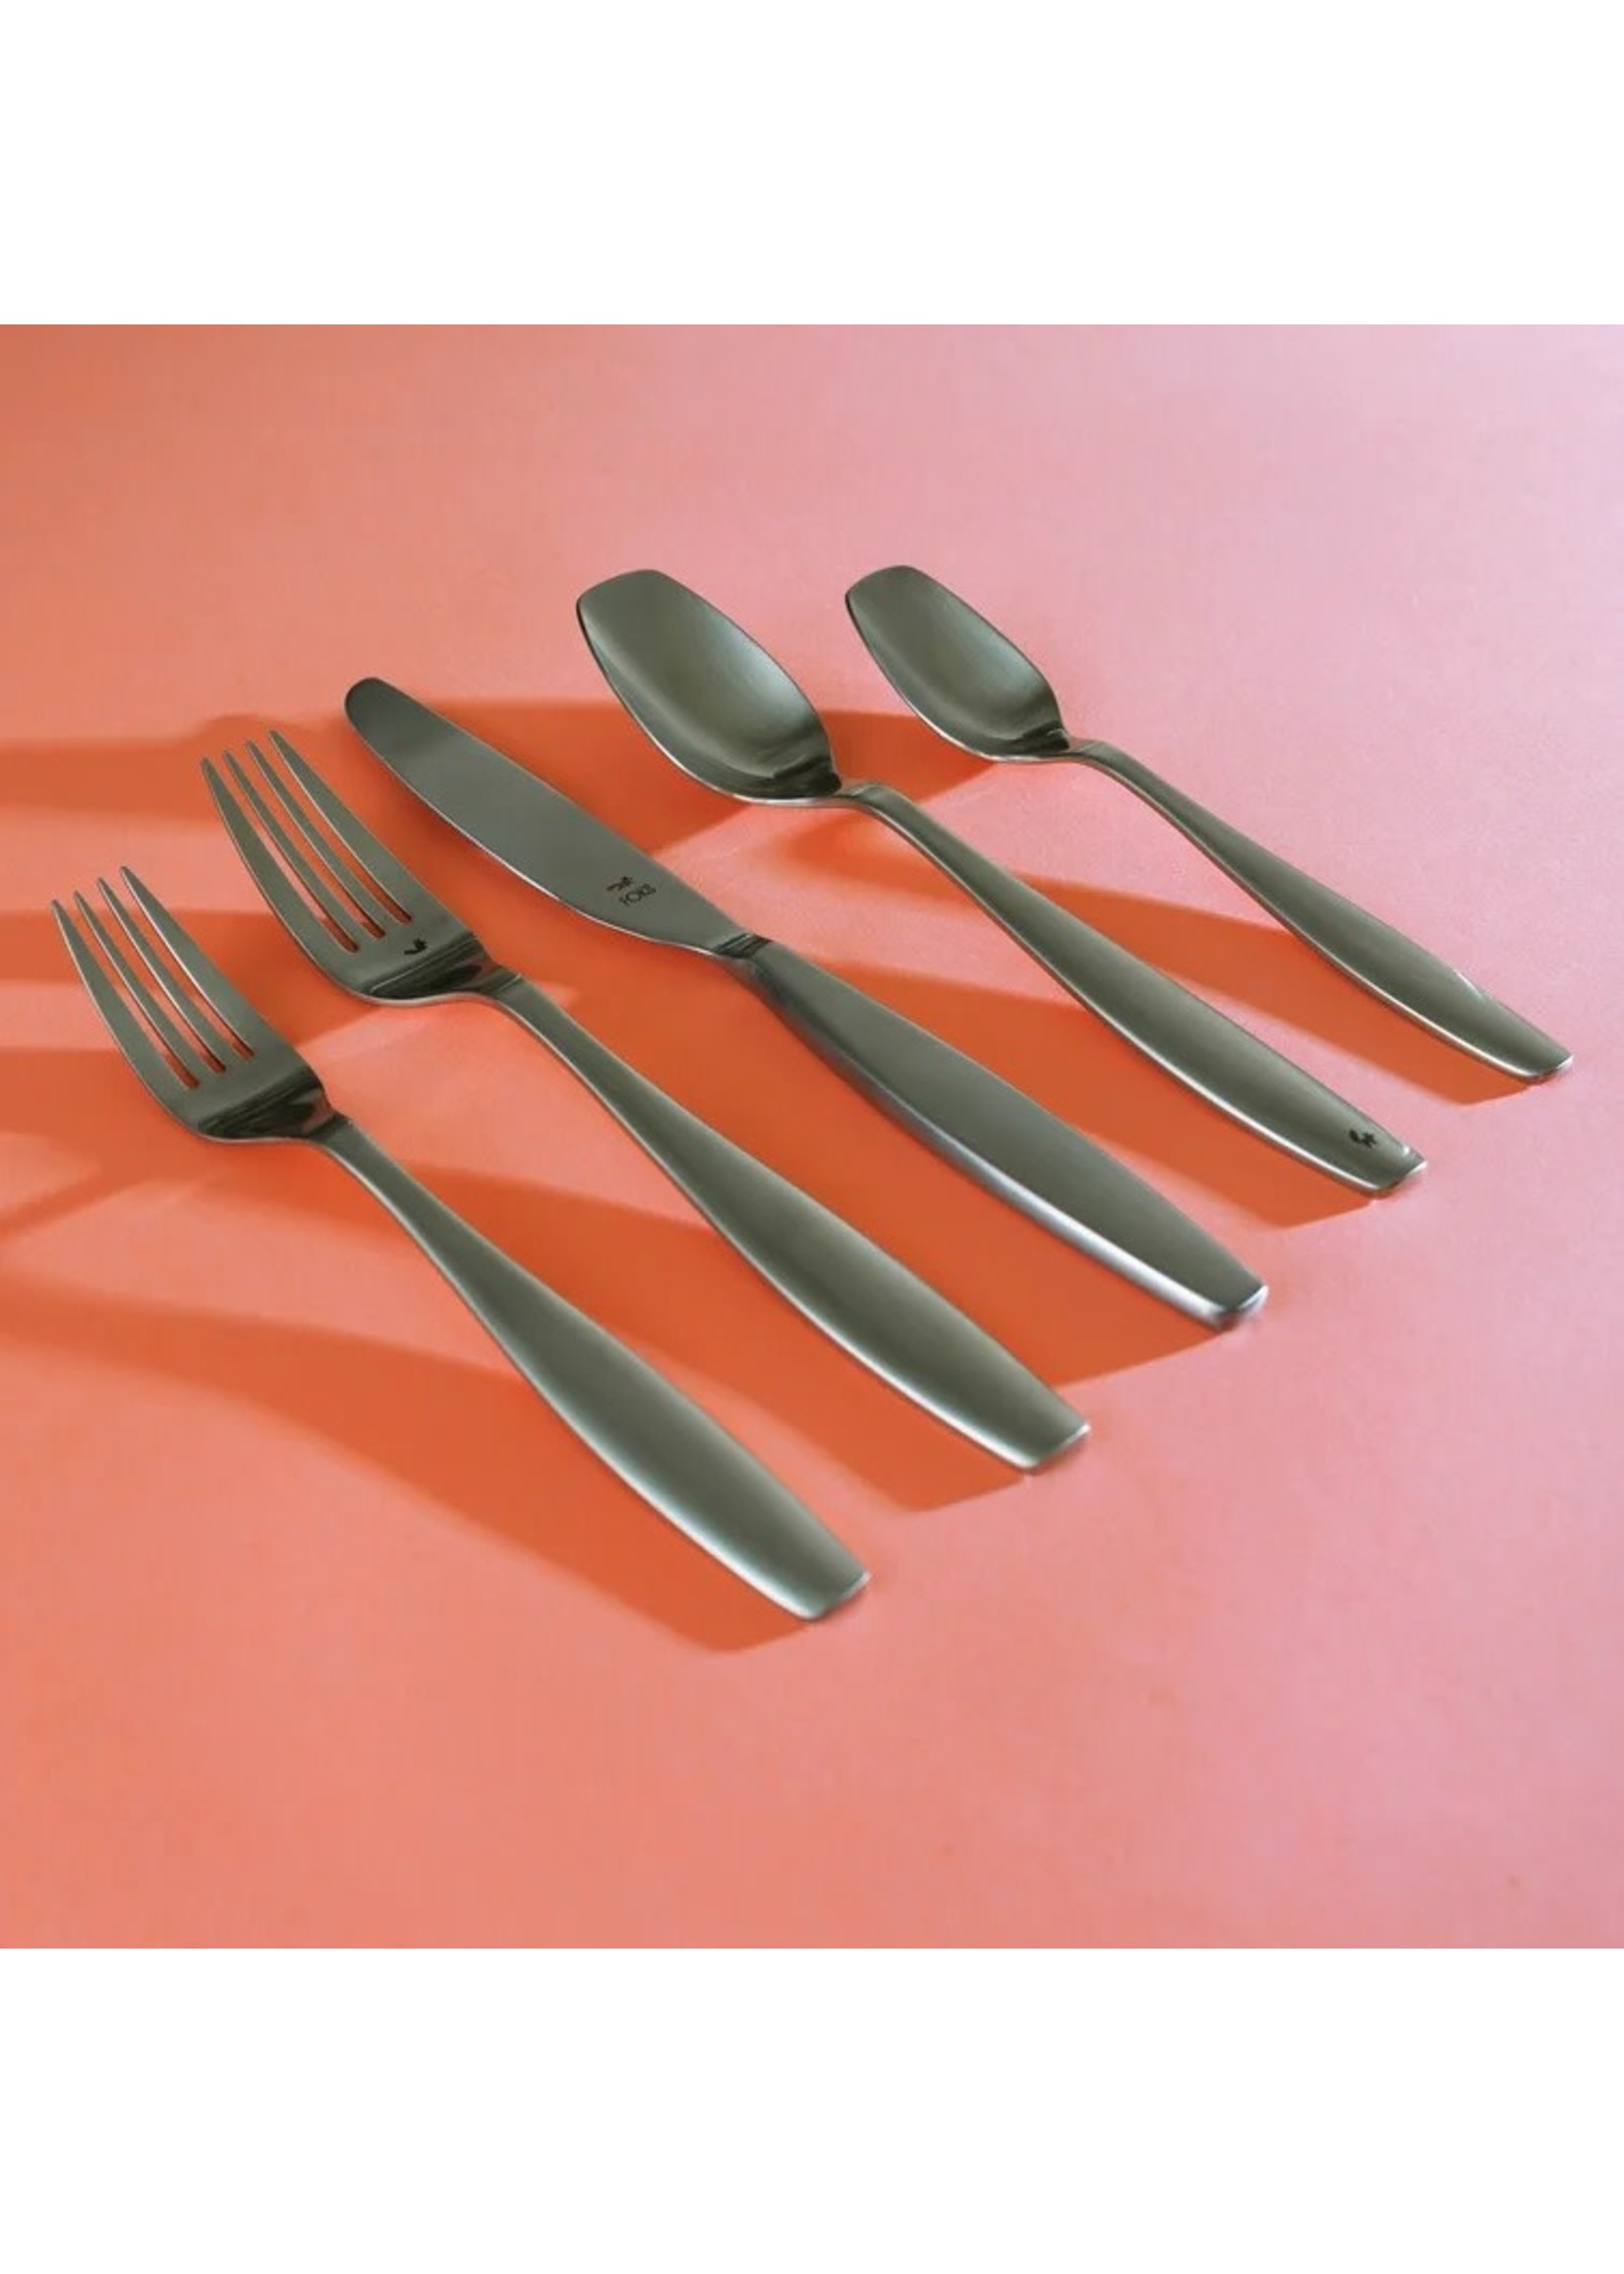 *Mingle 20 Piece 18/10 Stainless Steel Flatware Set Service for 4